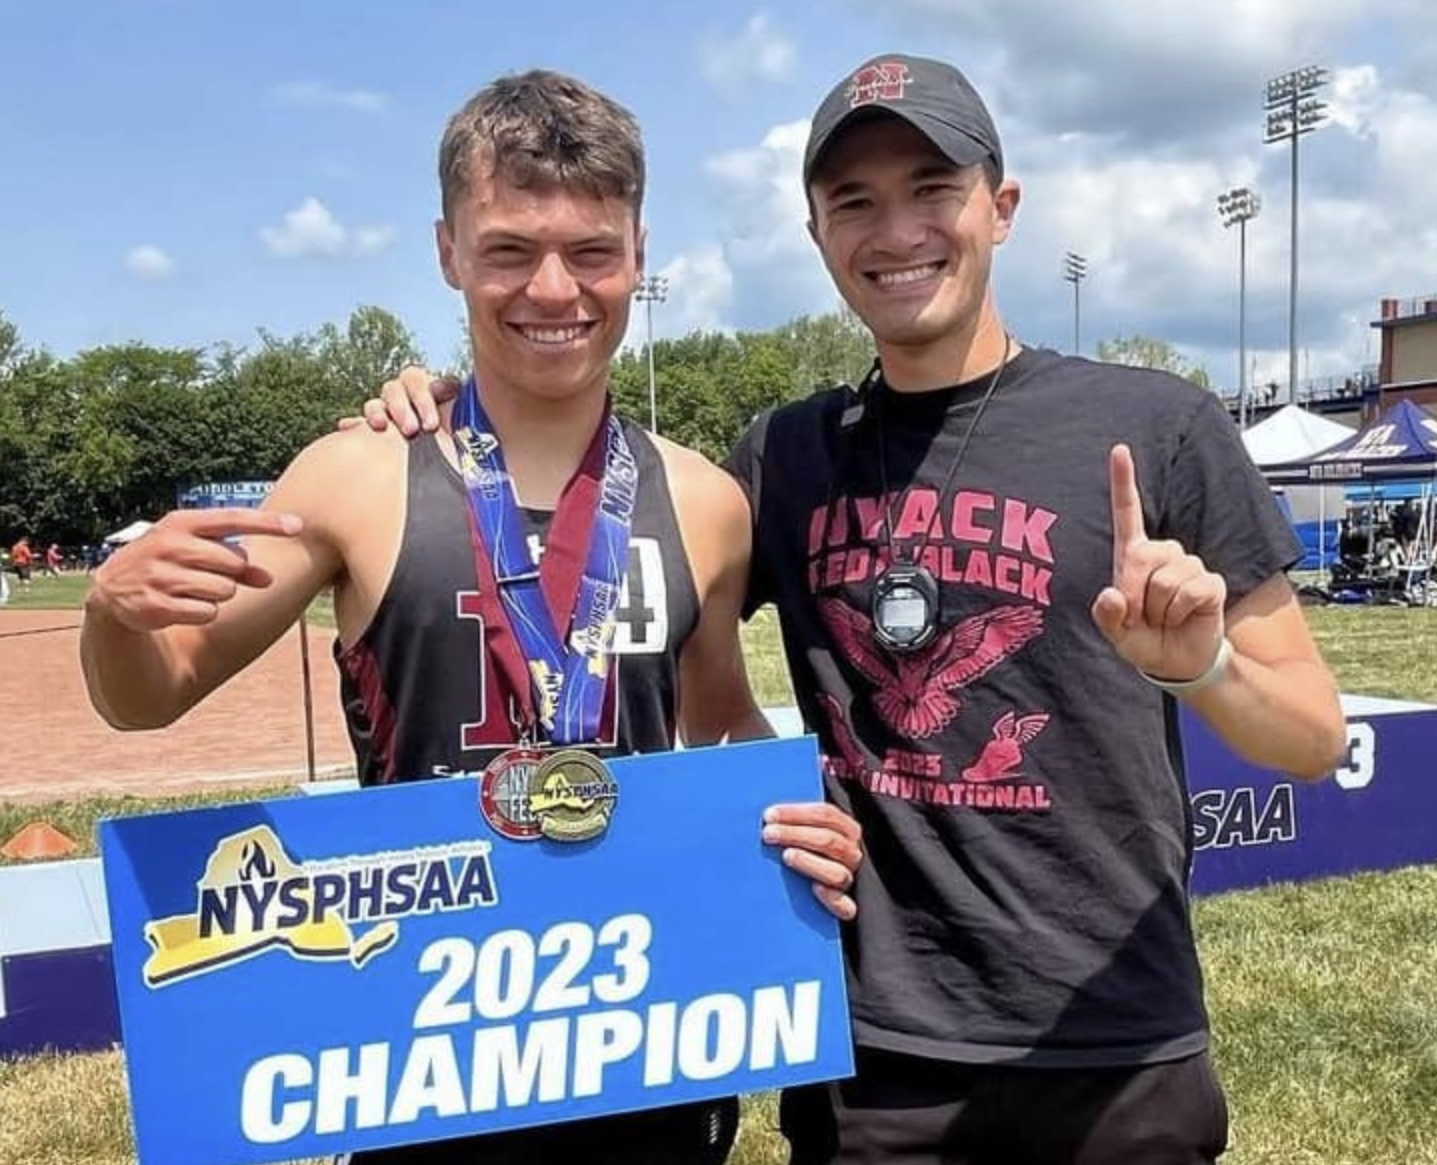 A young man who won the NYSPHSAA with his coach